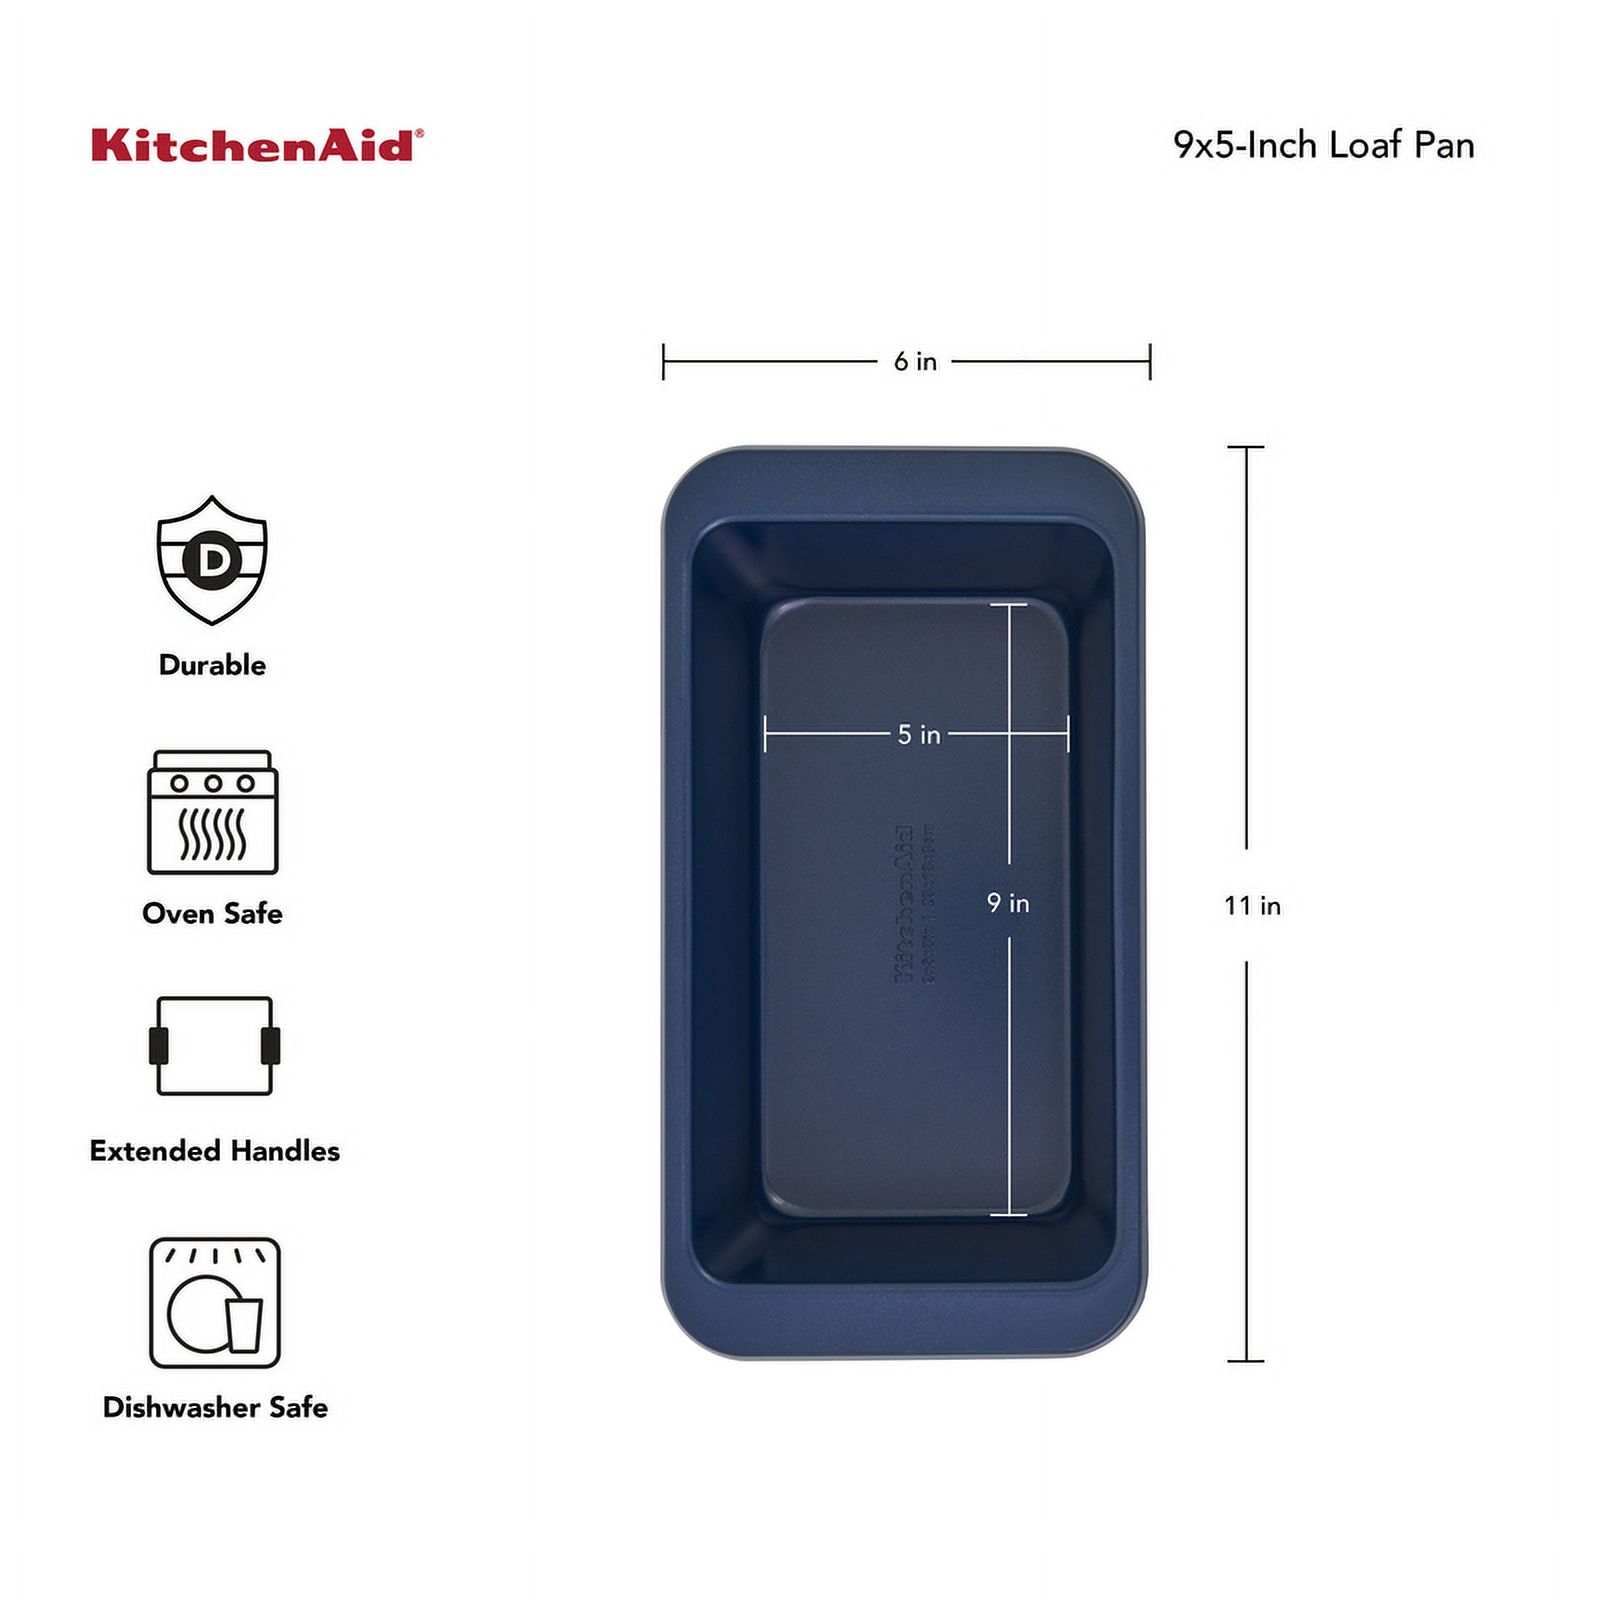 KitchenAid 0.6 Non-Stick Aluminized Steel 9X5 inch Loaf Pan Ink Blue - image 3 of 4